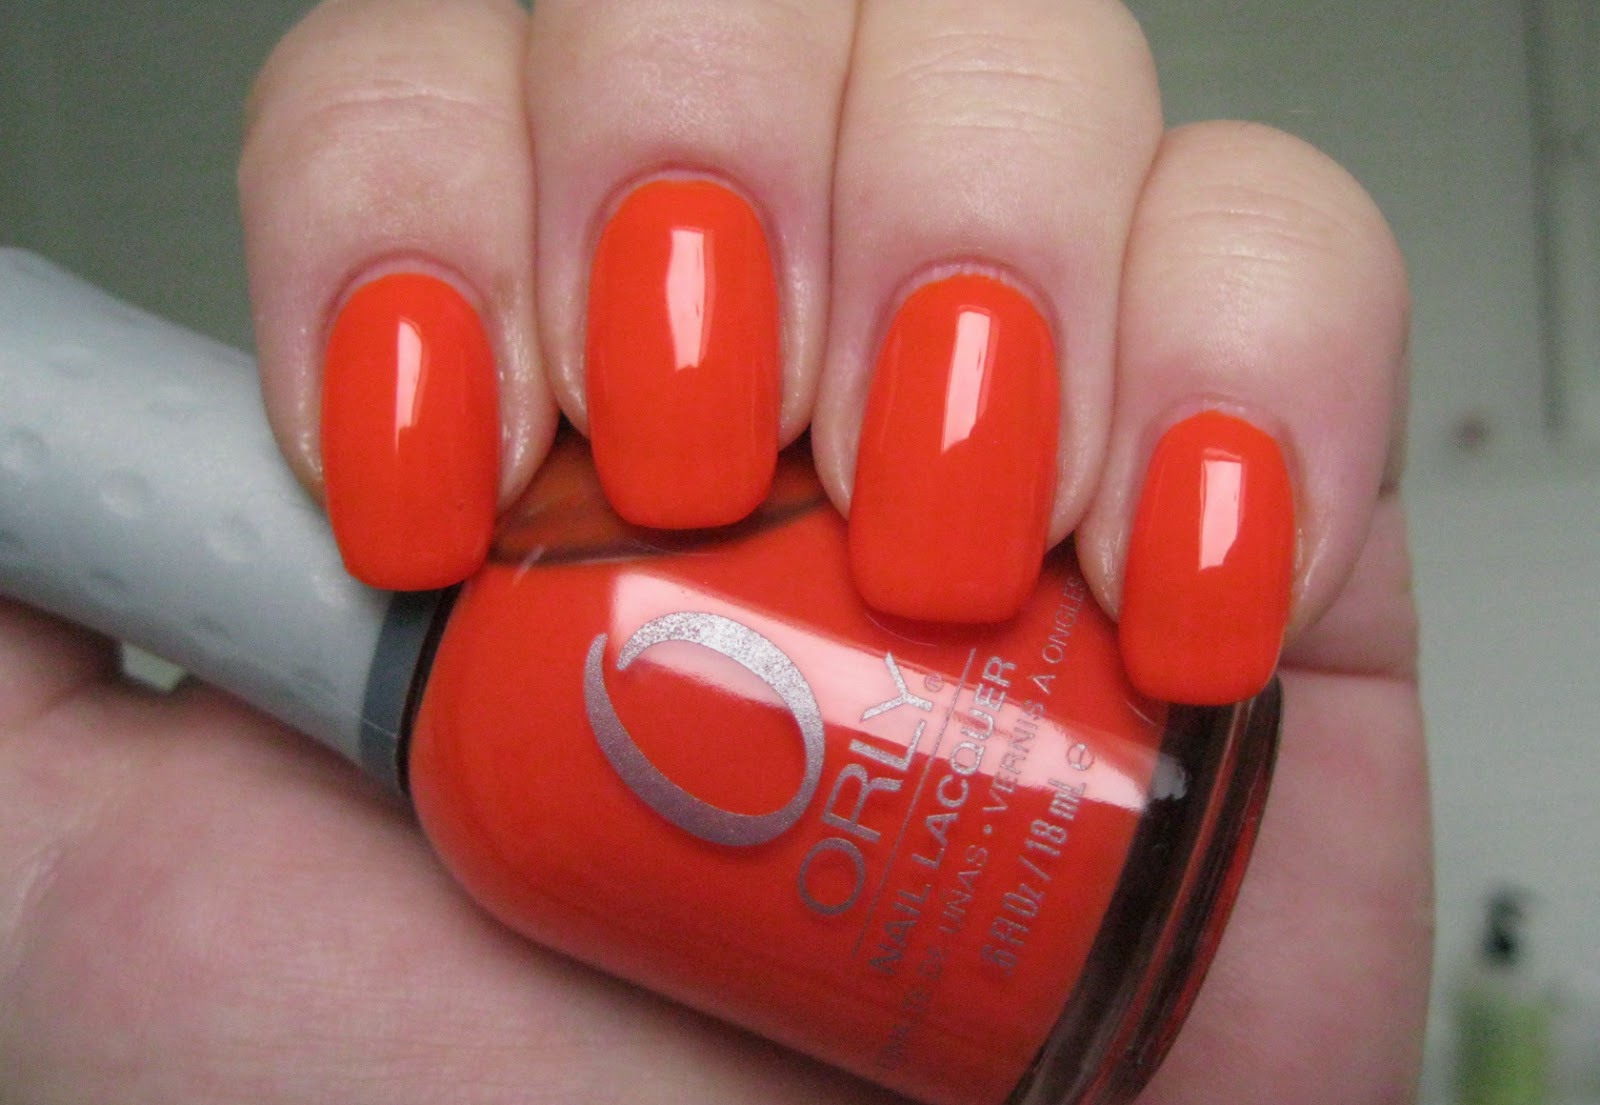 10. Orly Nail Lacquer in "Orange Punch" - wide 9